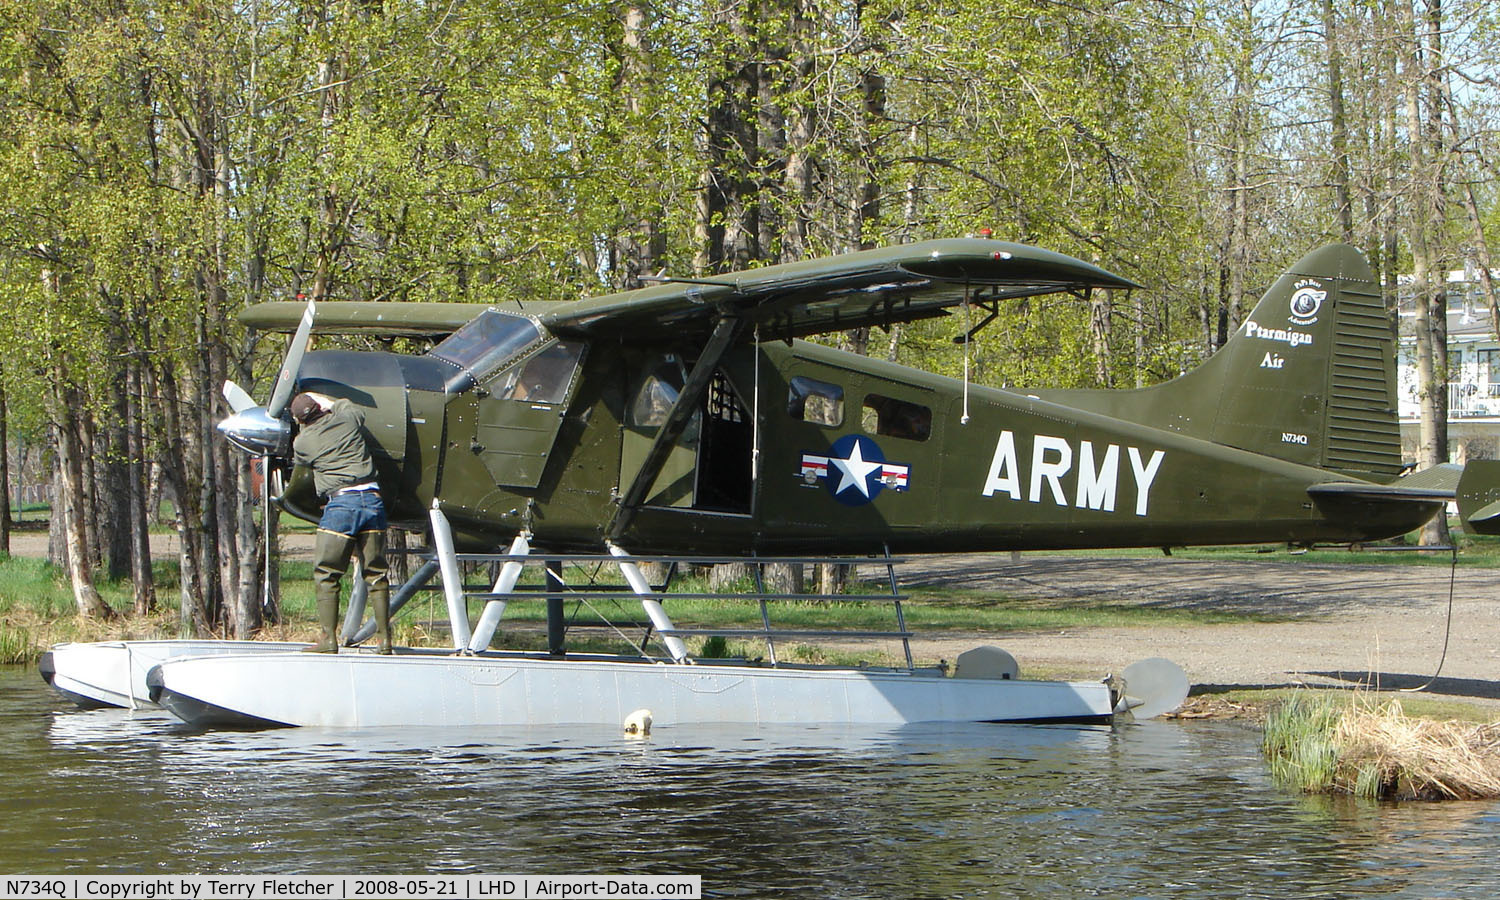 N734Q, 1958 De Havilland Canada DHC-2 MK. I(L20A) C/N 1395, 1958 DHC2 Beaver of Ptarmagin Air in ARMY livery at Lake Hood